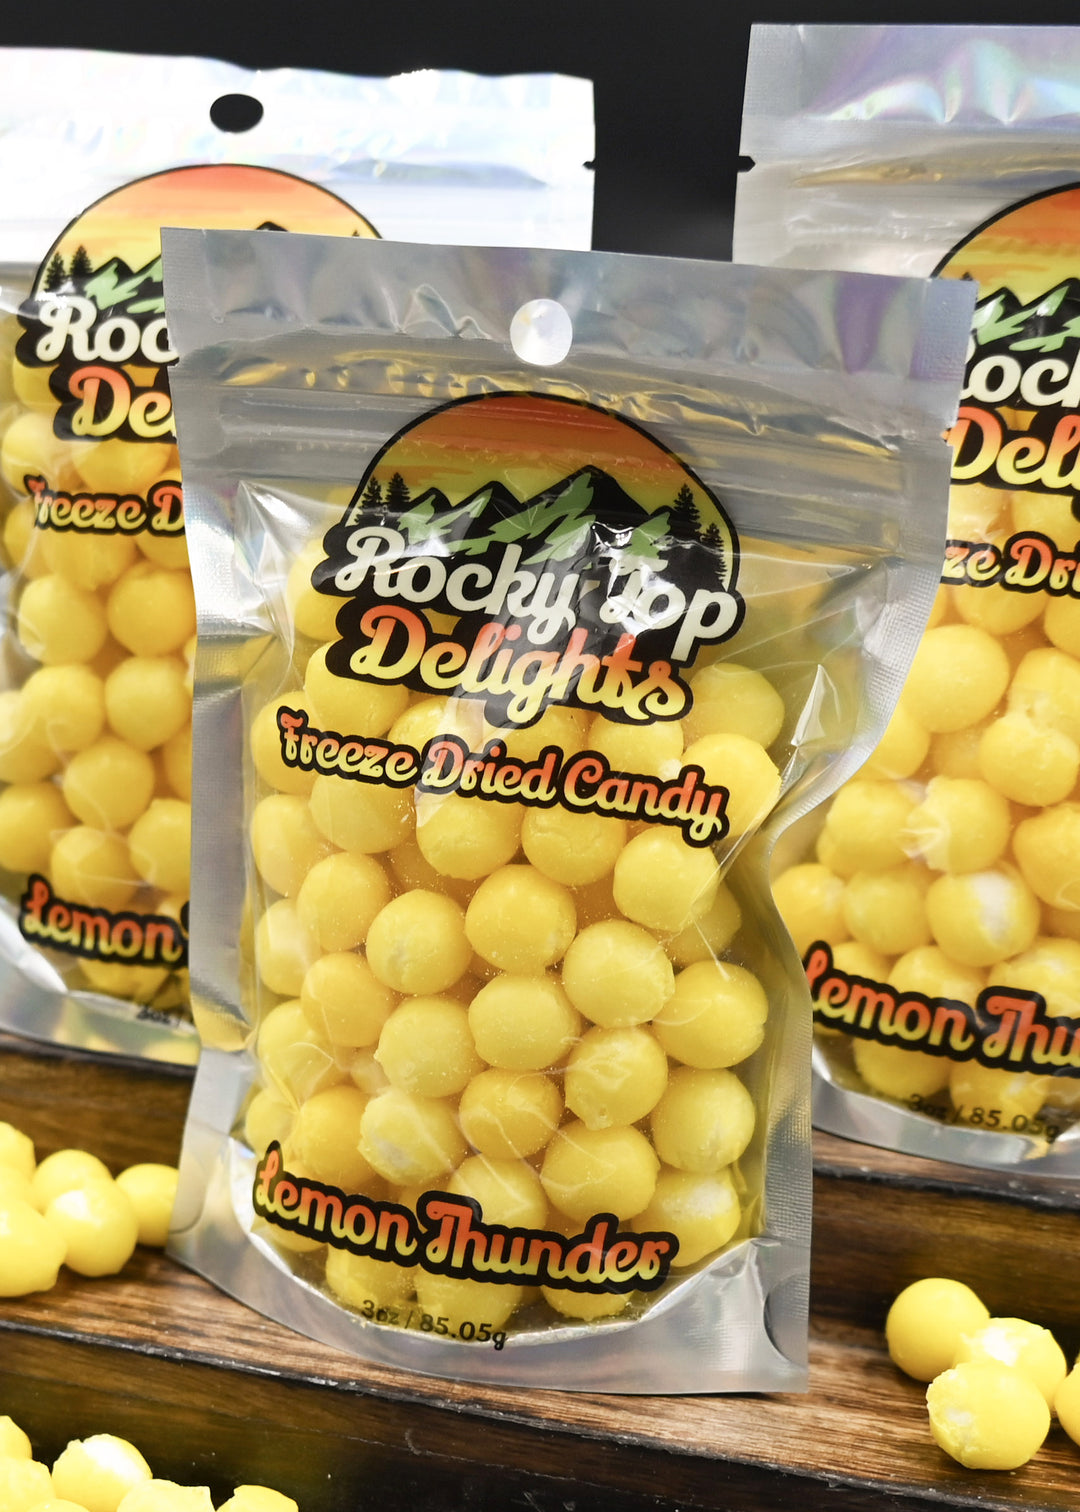 Rocky Top Delights Lemon Thunder Freeze Dried Candy